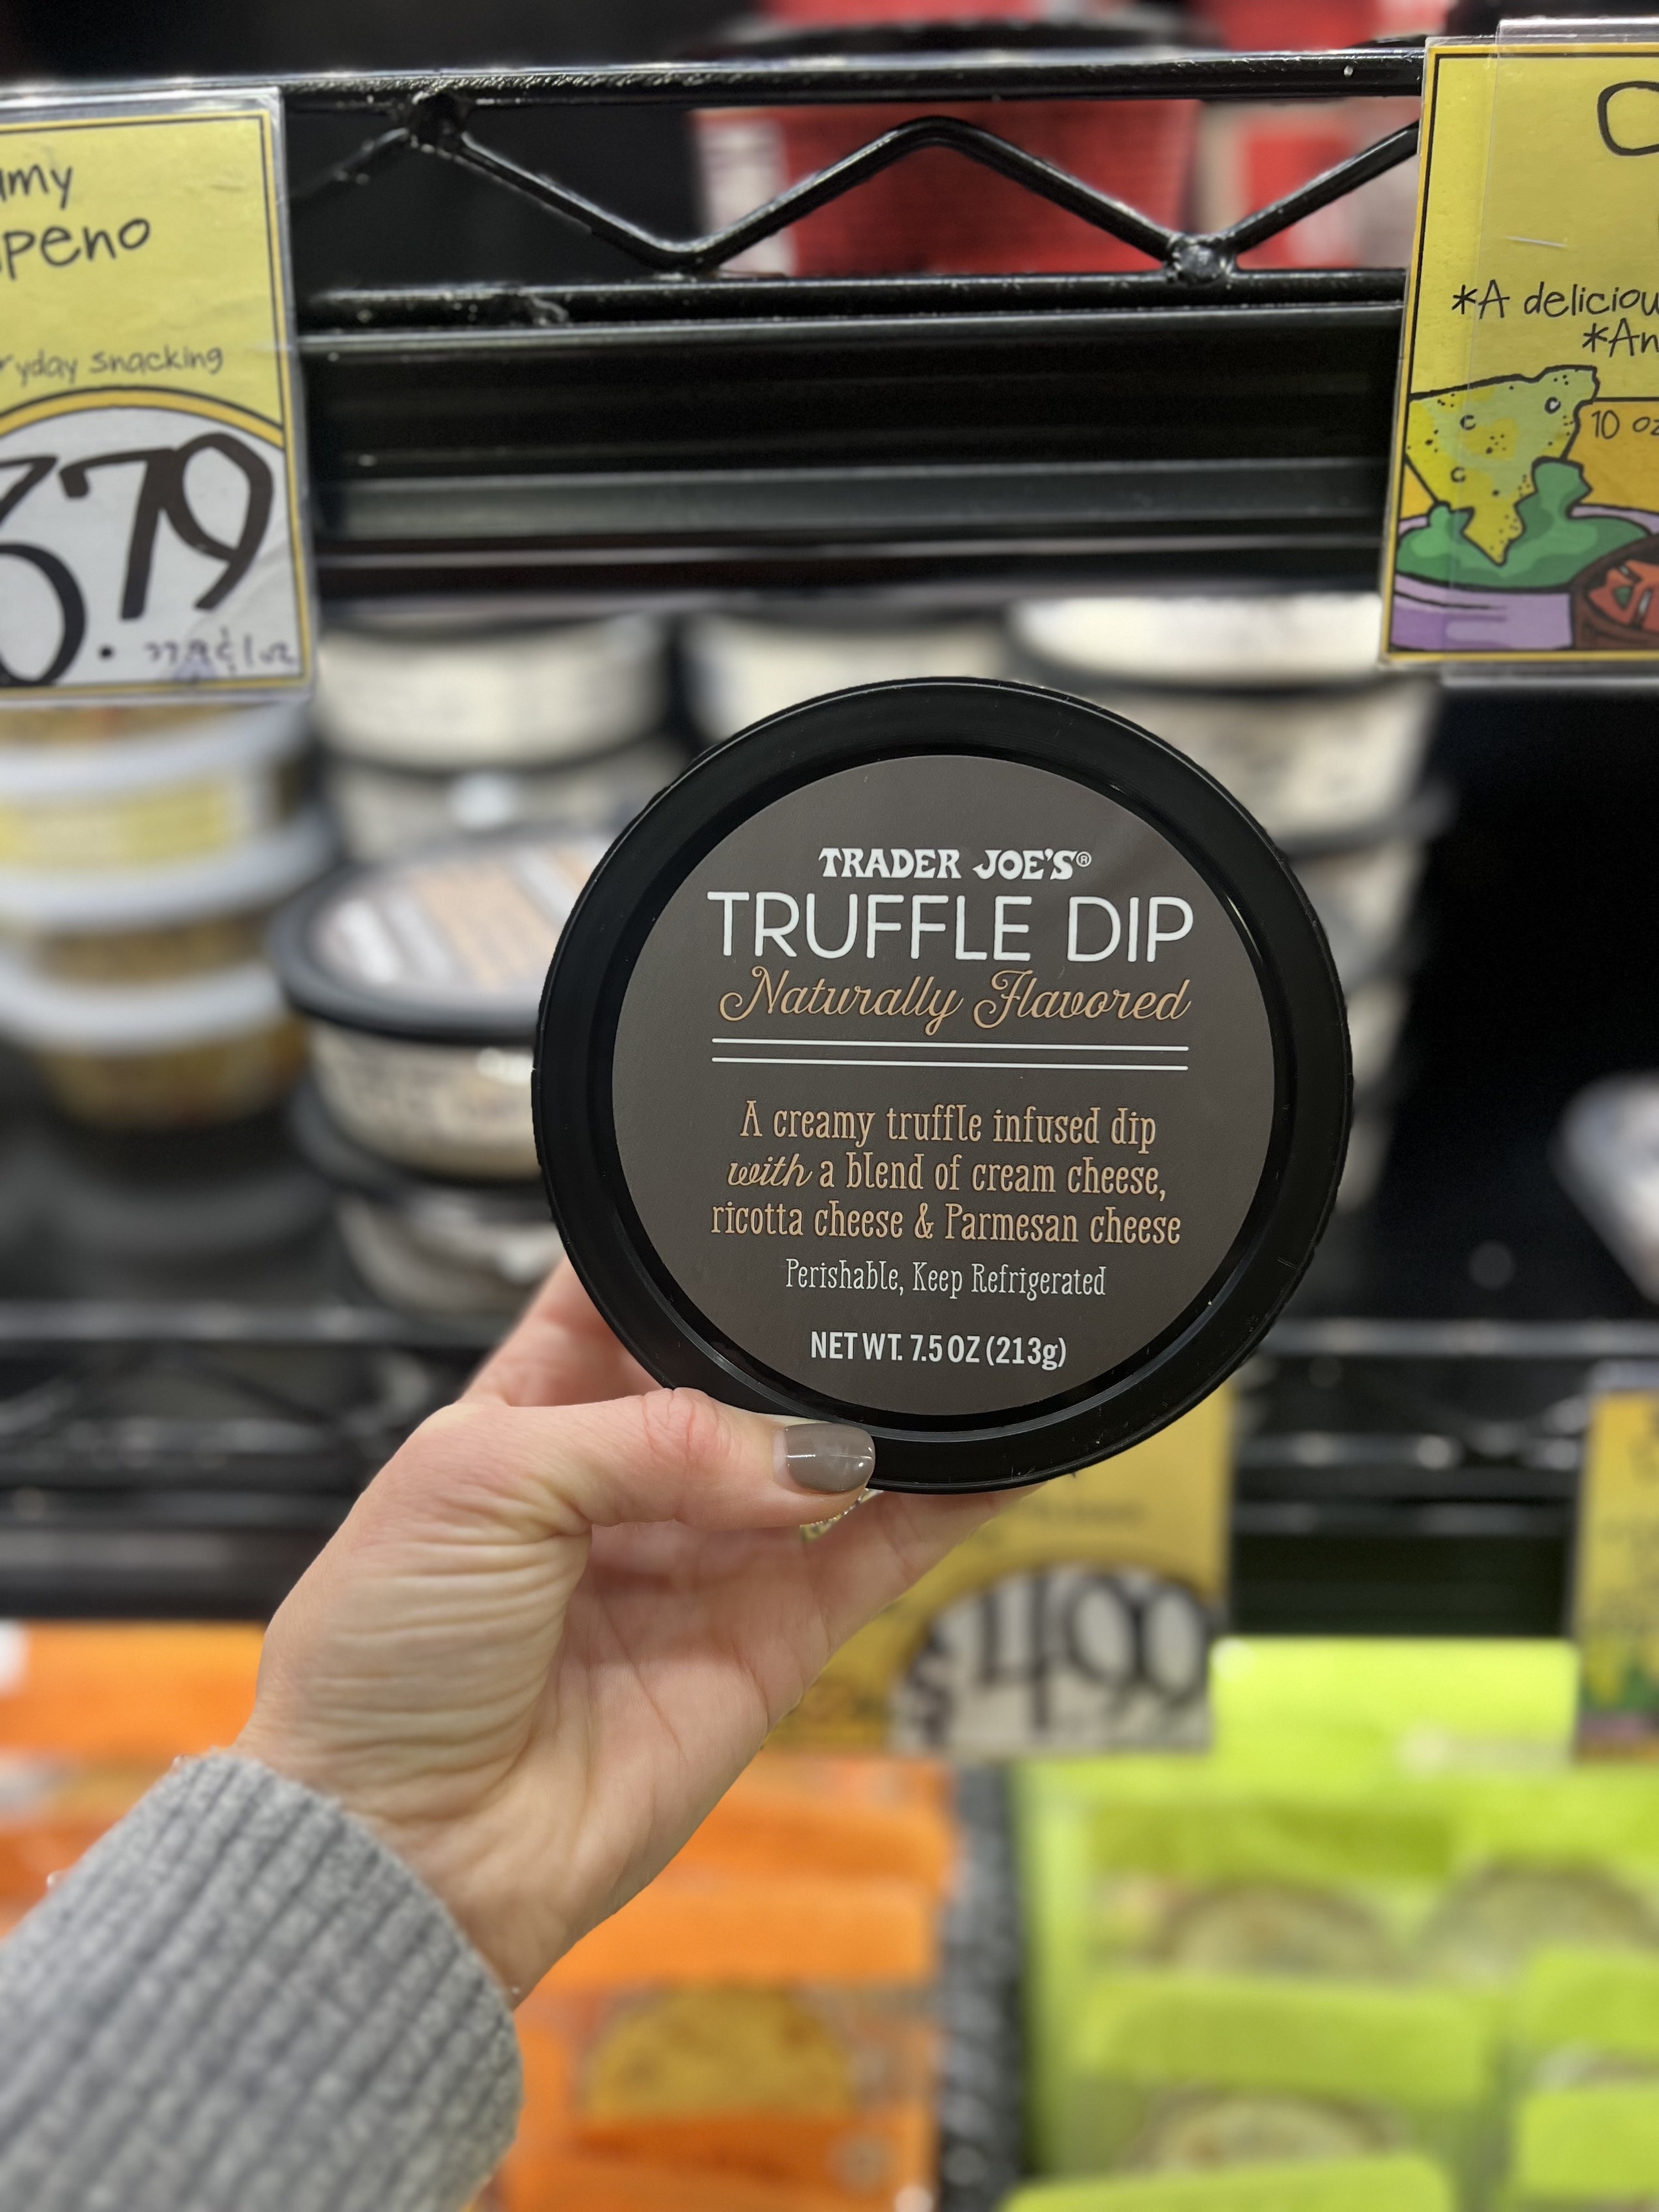 A container of Truffle Dip